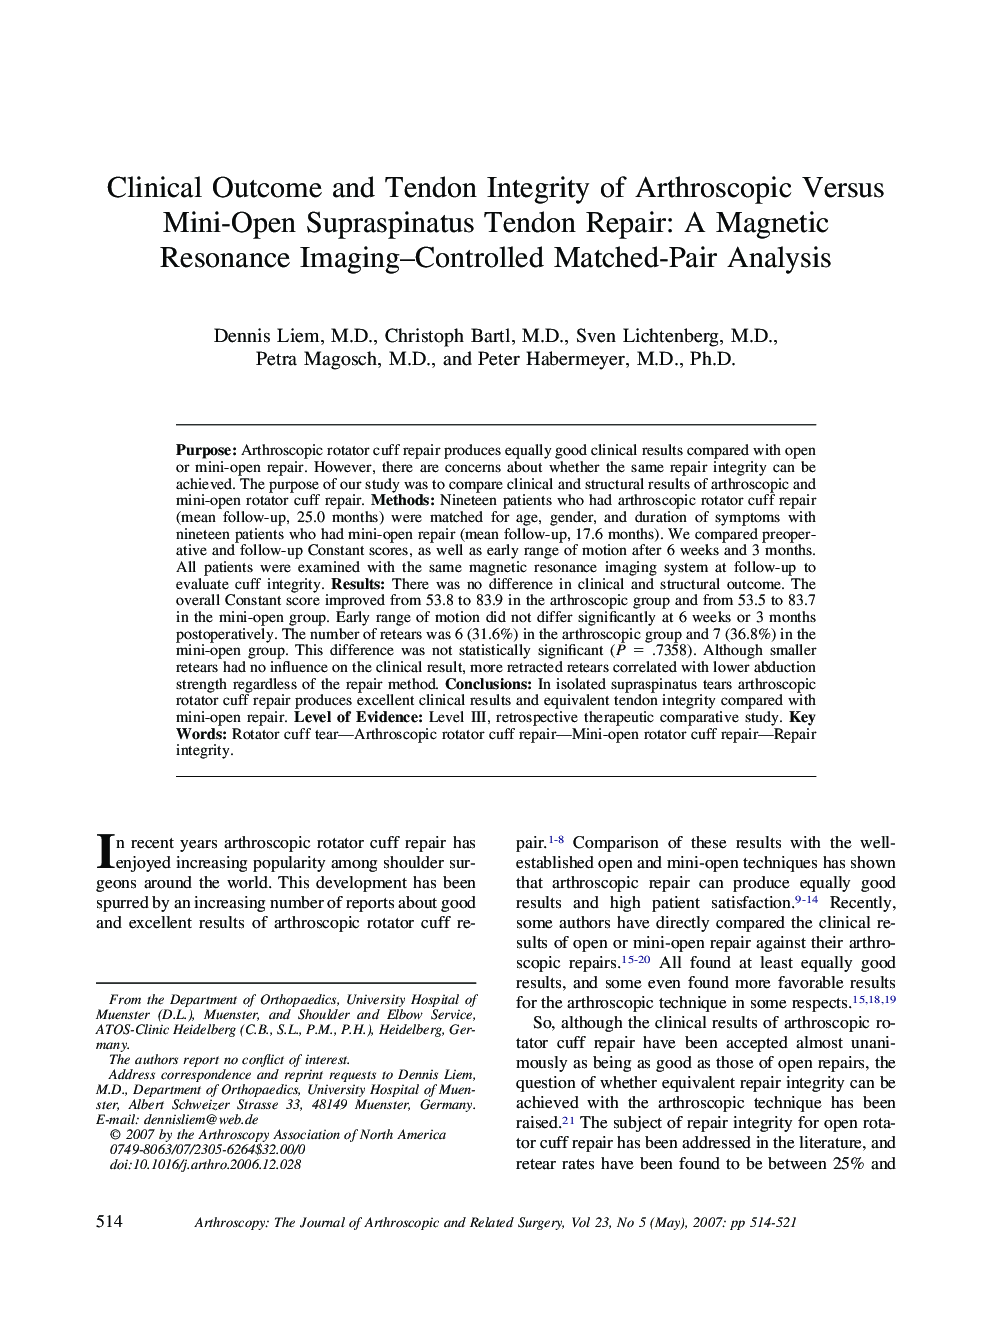 Clinical Outcome and Tendon Integrity of Arthroscopic Versus Mini-Open Supraspinatus Tendon Repair: A Magnetic Resonance Imaging–Controlled Matched-Pair Analysis 